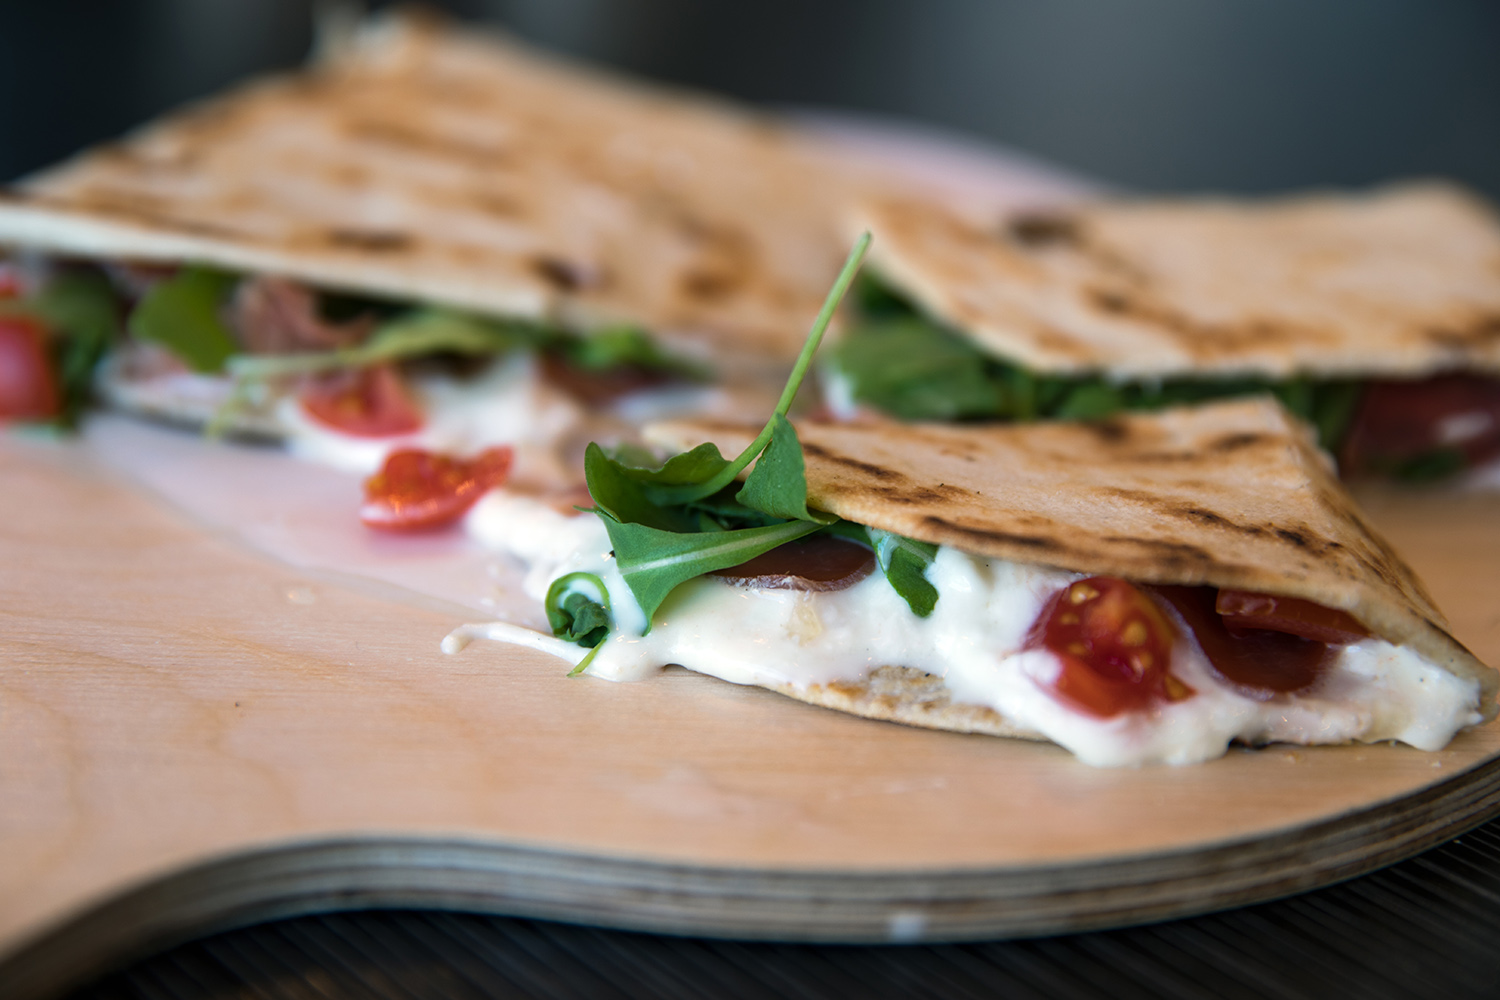 Detail Typical Italian freshly baked stuffed Italian piadina, similar to the spianata or tortillas stuffed with raw ham, rocket salad and melted stracchino cheese Turin Italy September 2018